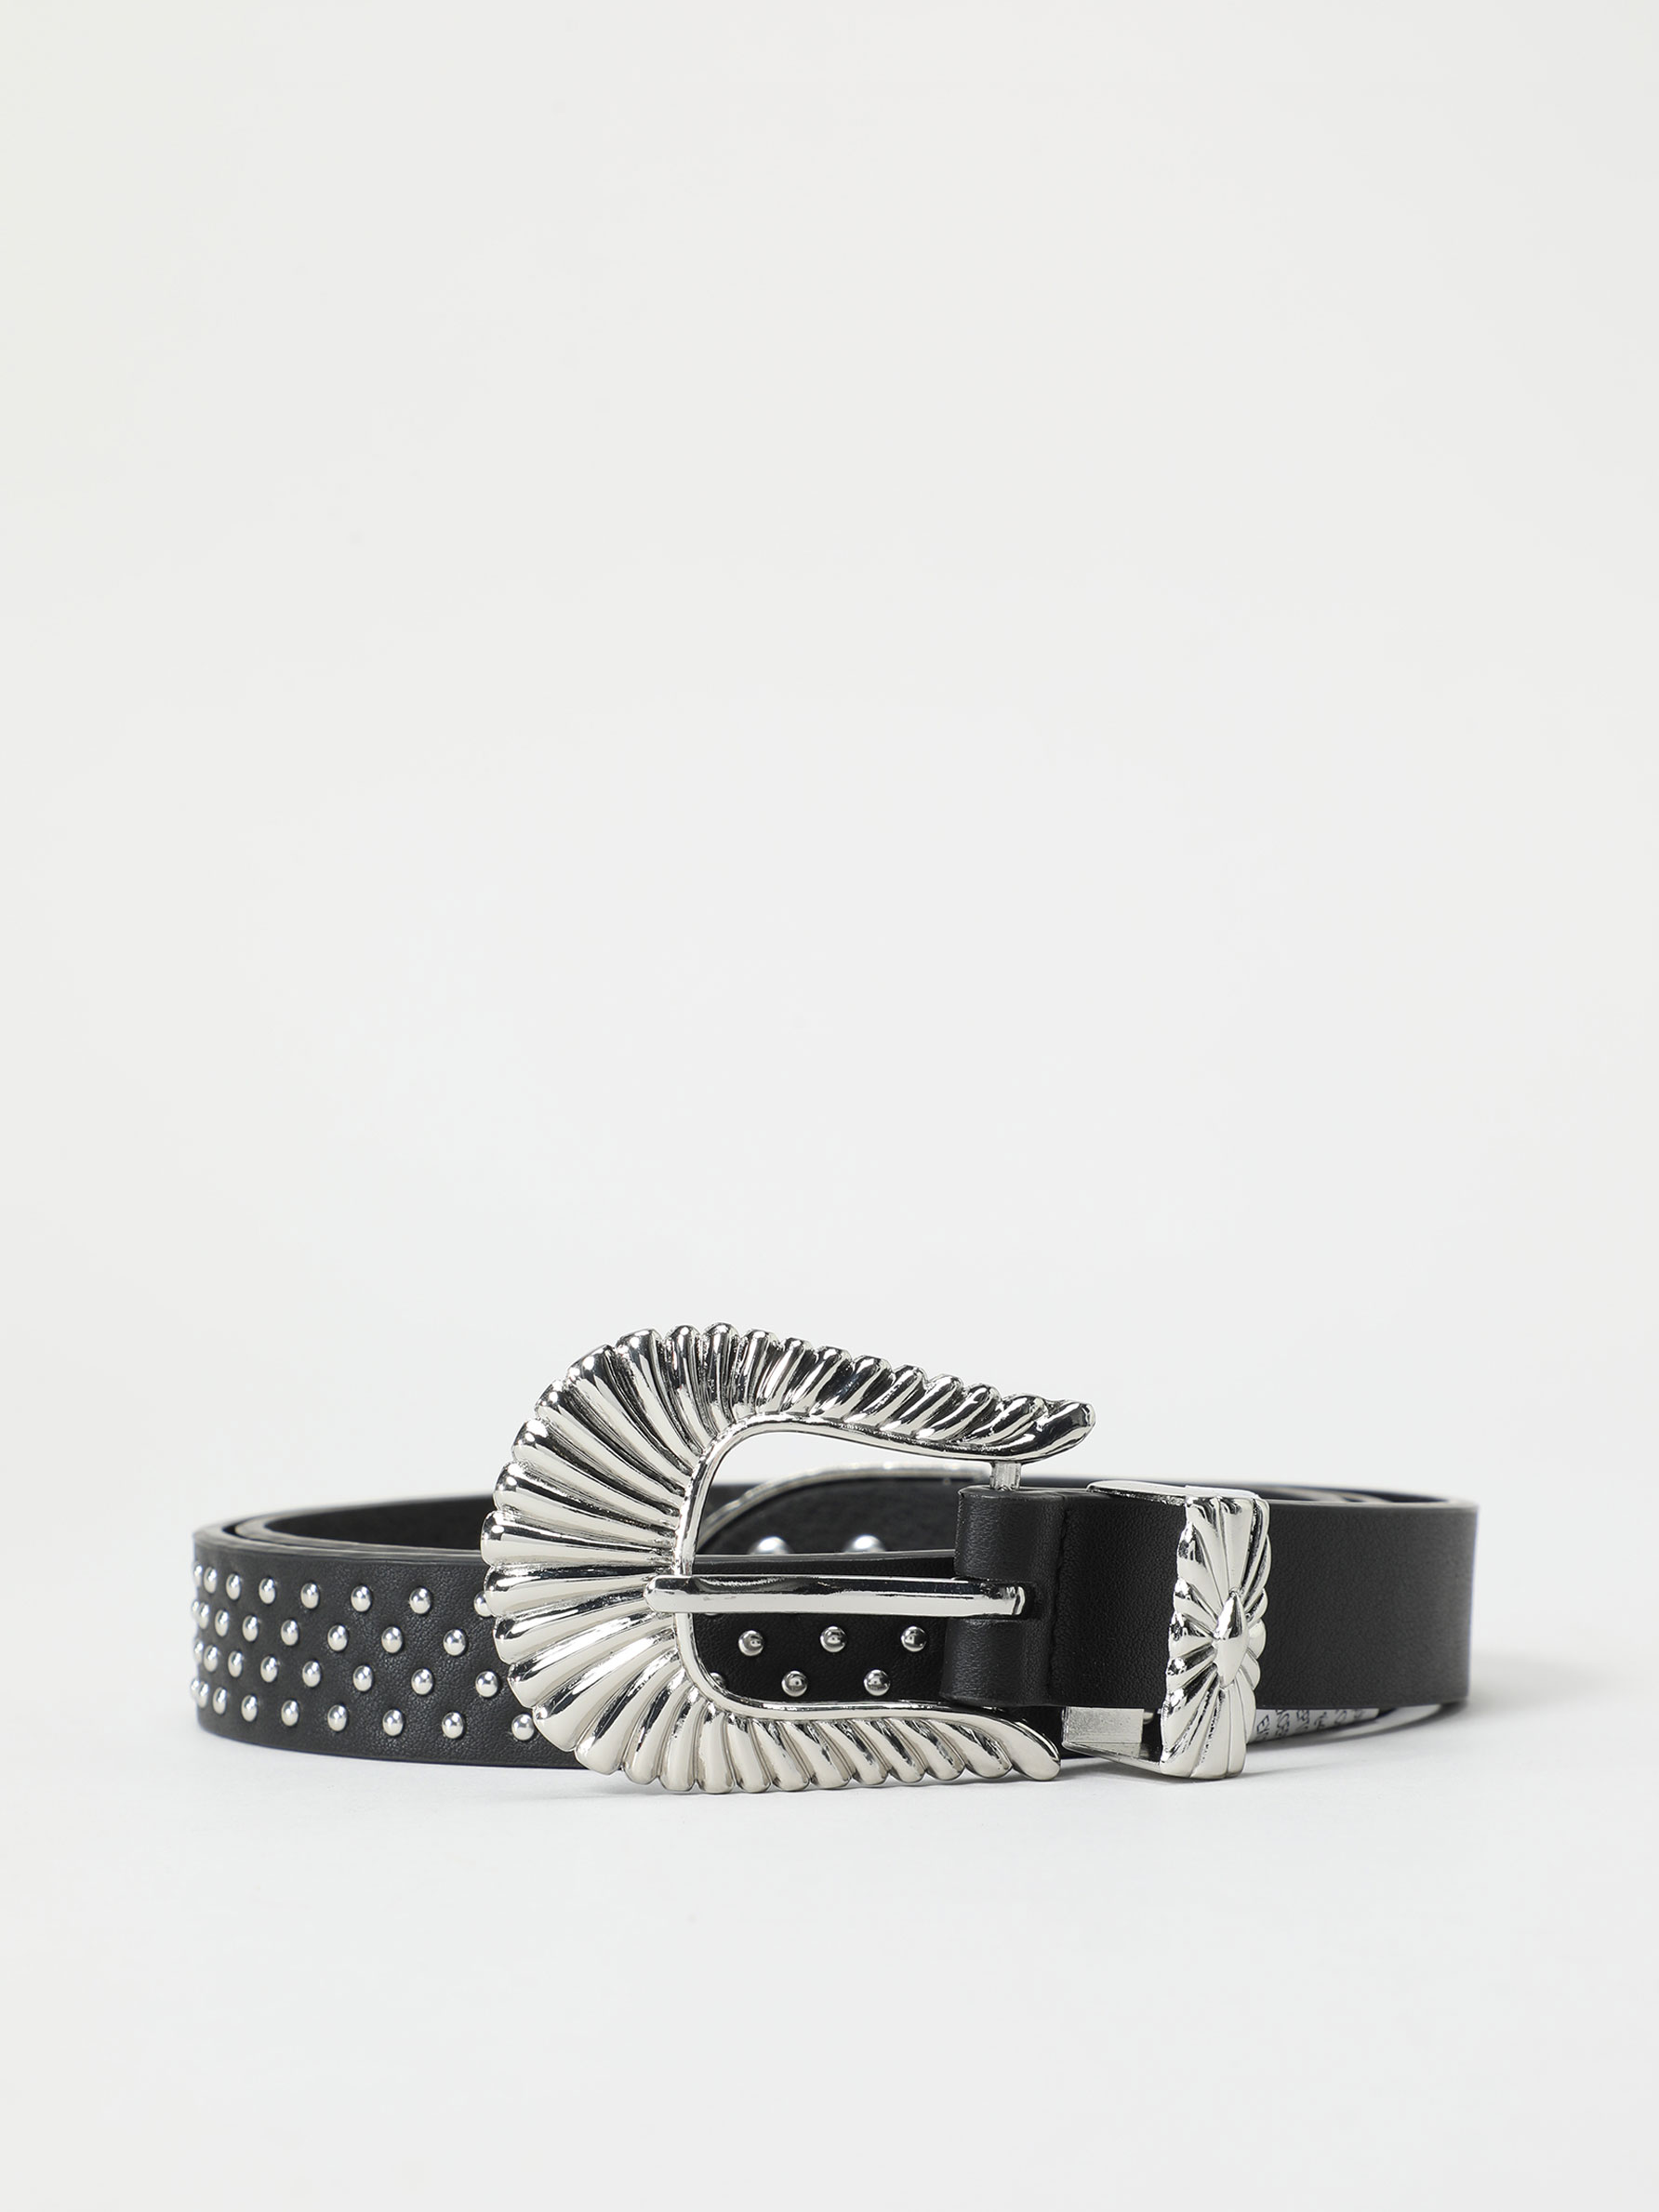 Studded belt - ACCESSORIES - THE ENTIRE COLLECTION - WOMAN - | Lefties Oman